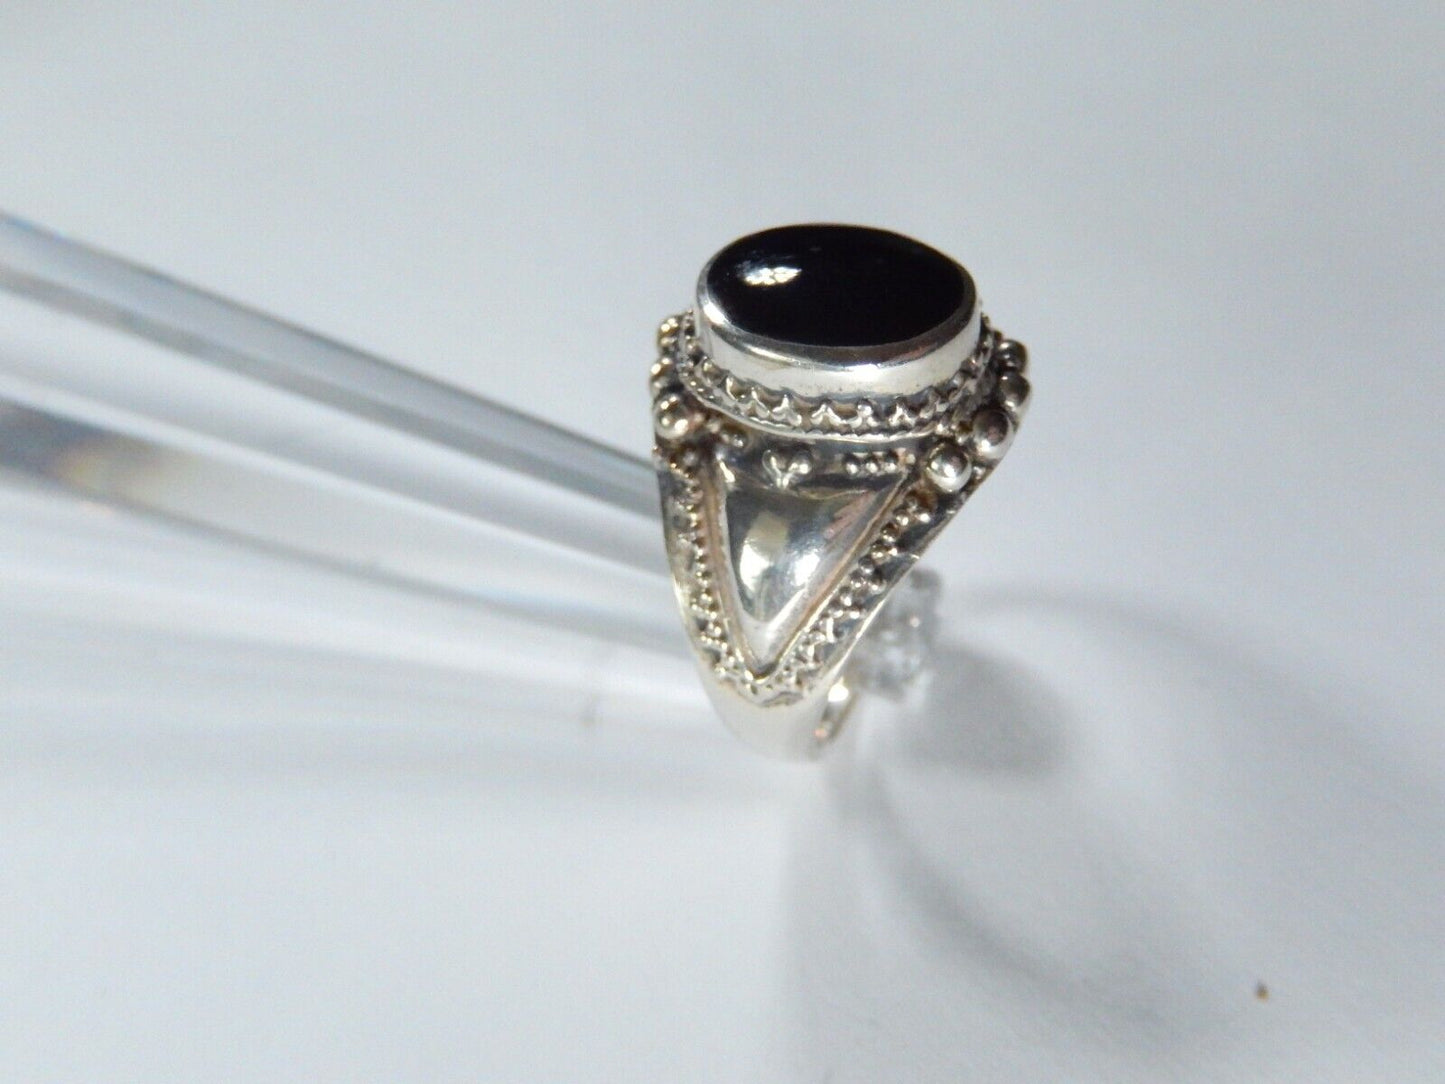 *VINTAGE* Black Onyx 925 Sterling Silver Boho Handcrafted Ring Size 7